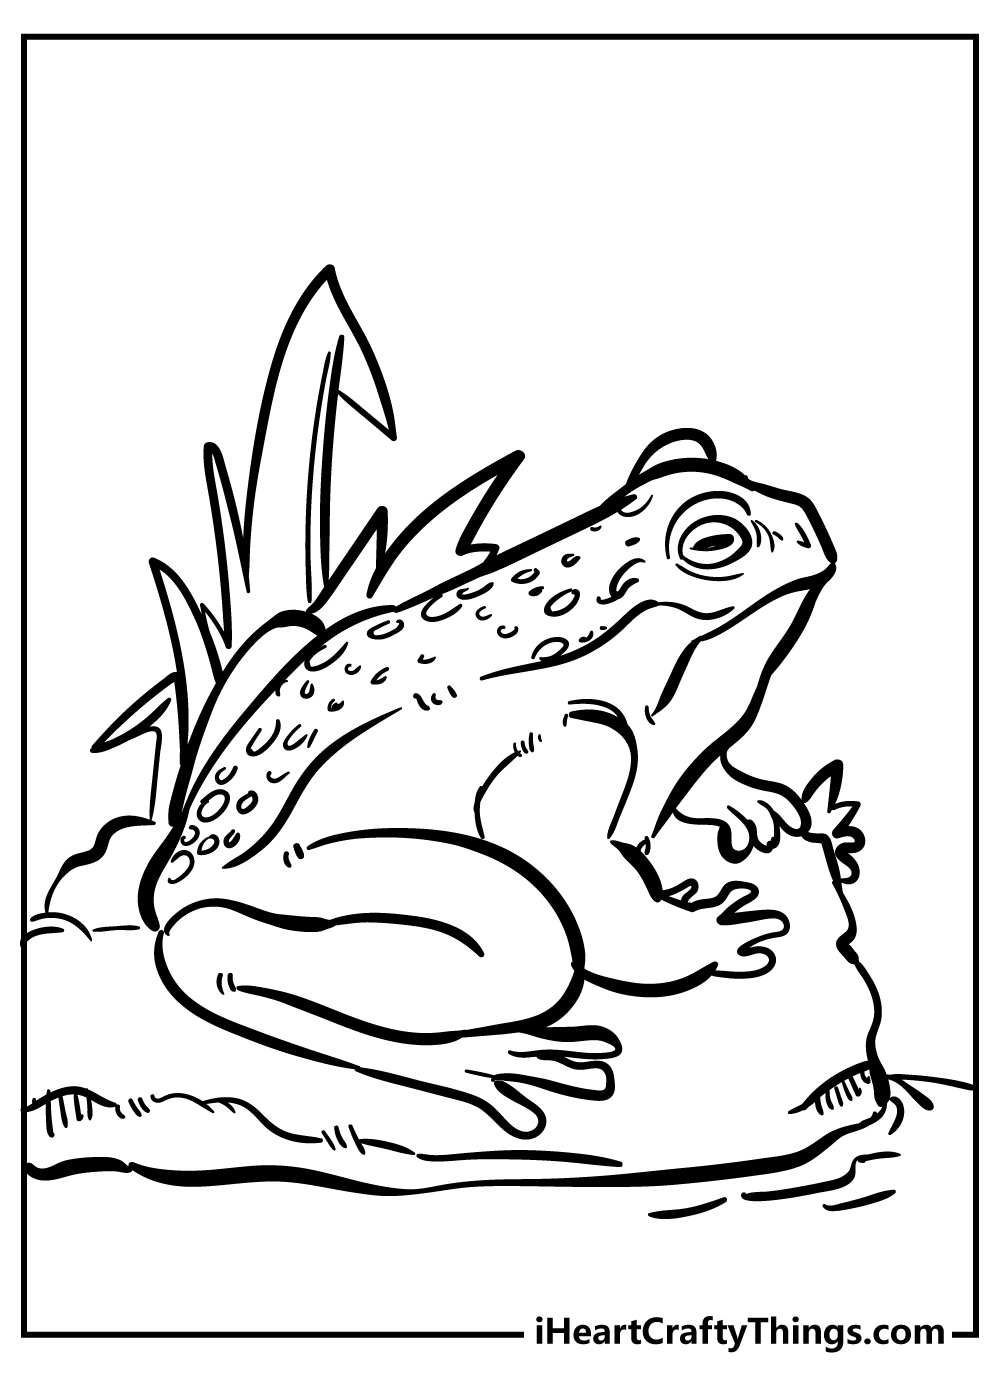 Toad coloring pages free printables